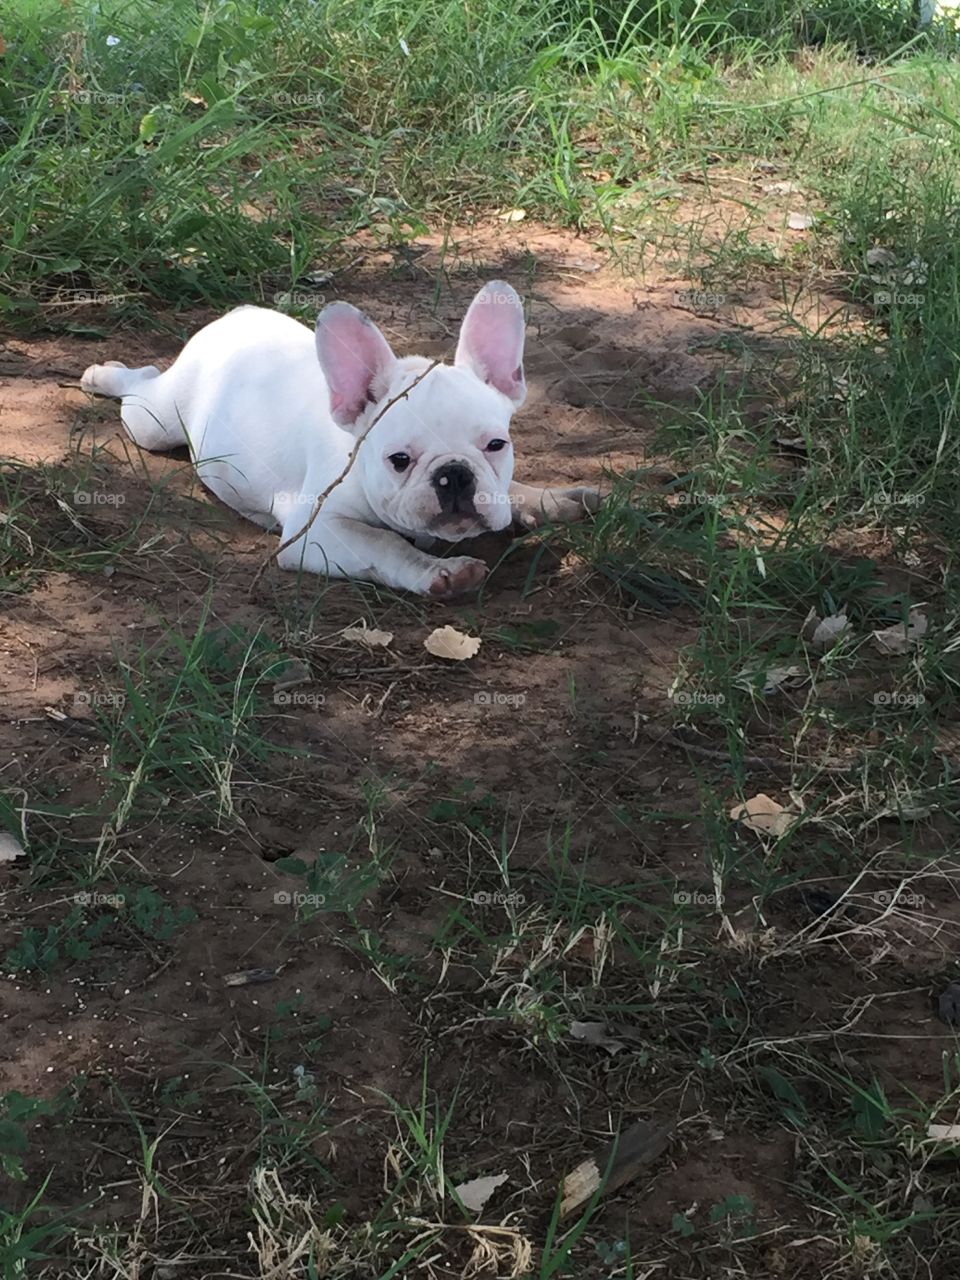 Oggie is cooling down in the dirt and shade. Nothing like laying his belly on some shades ground.